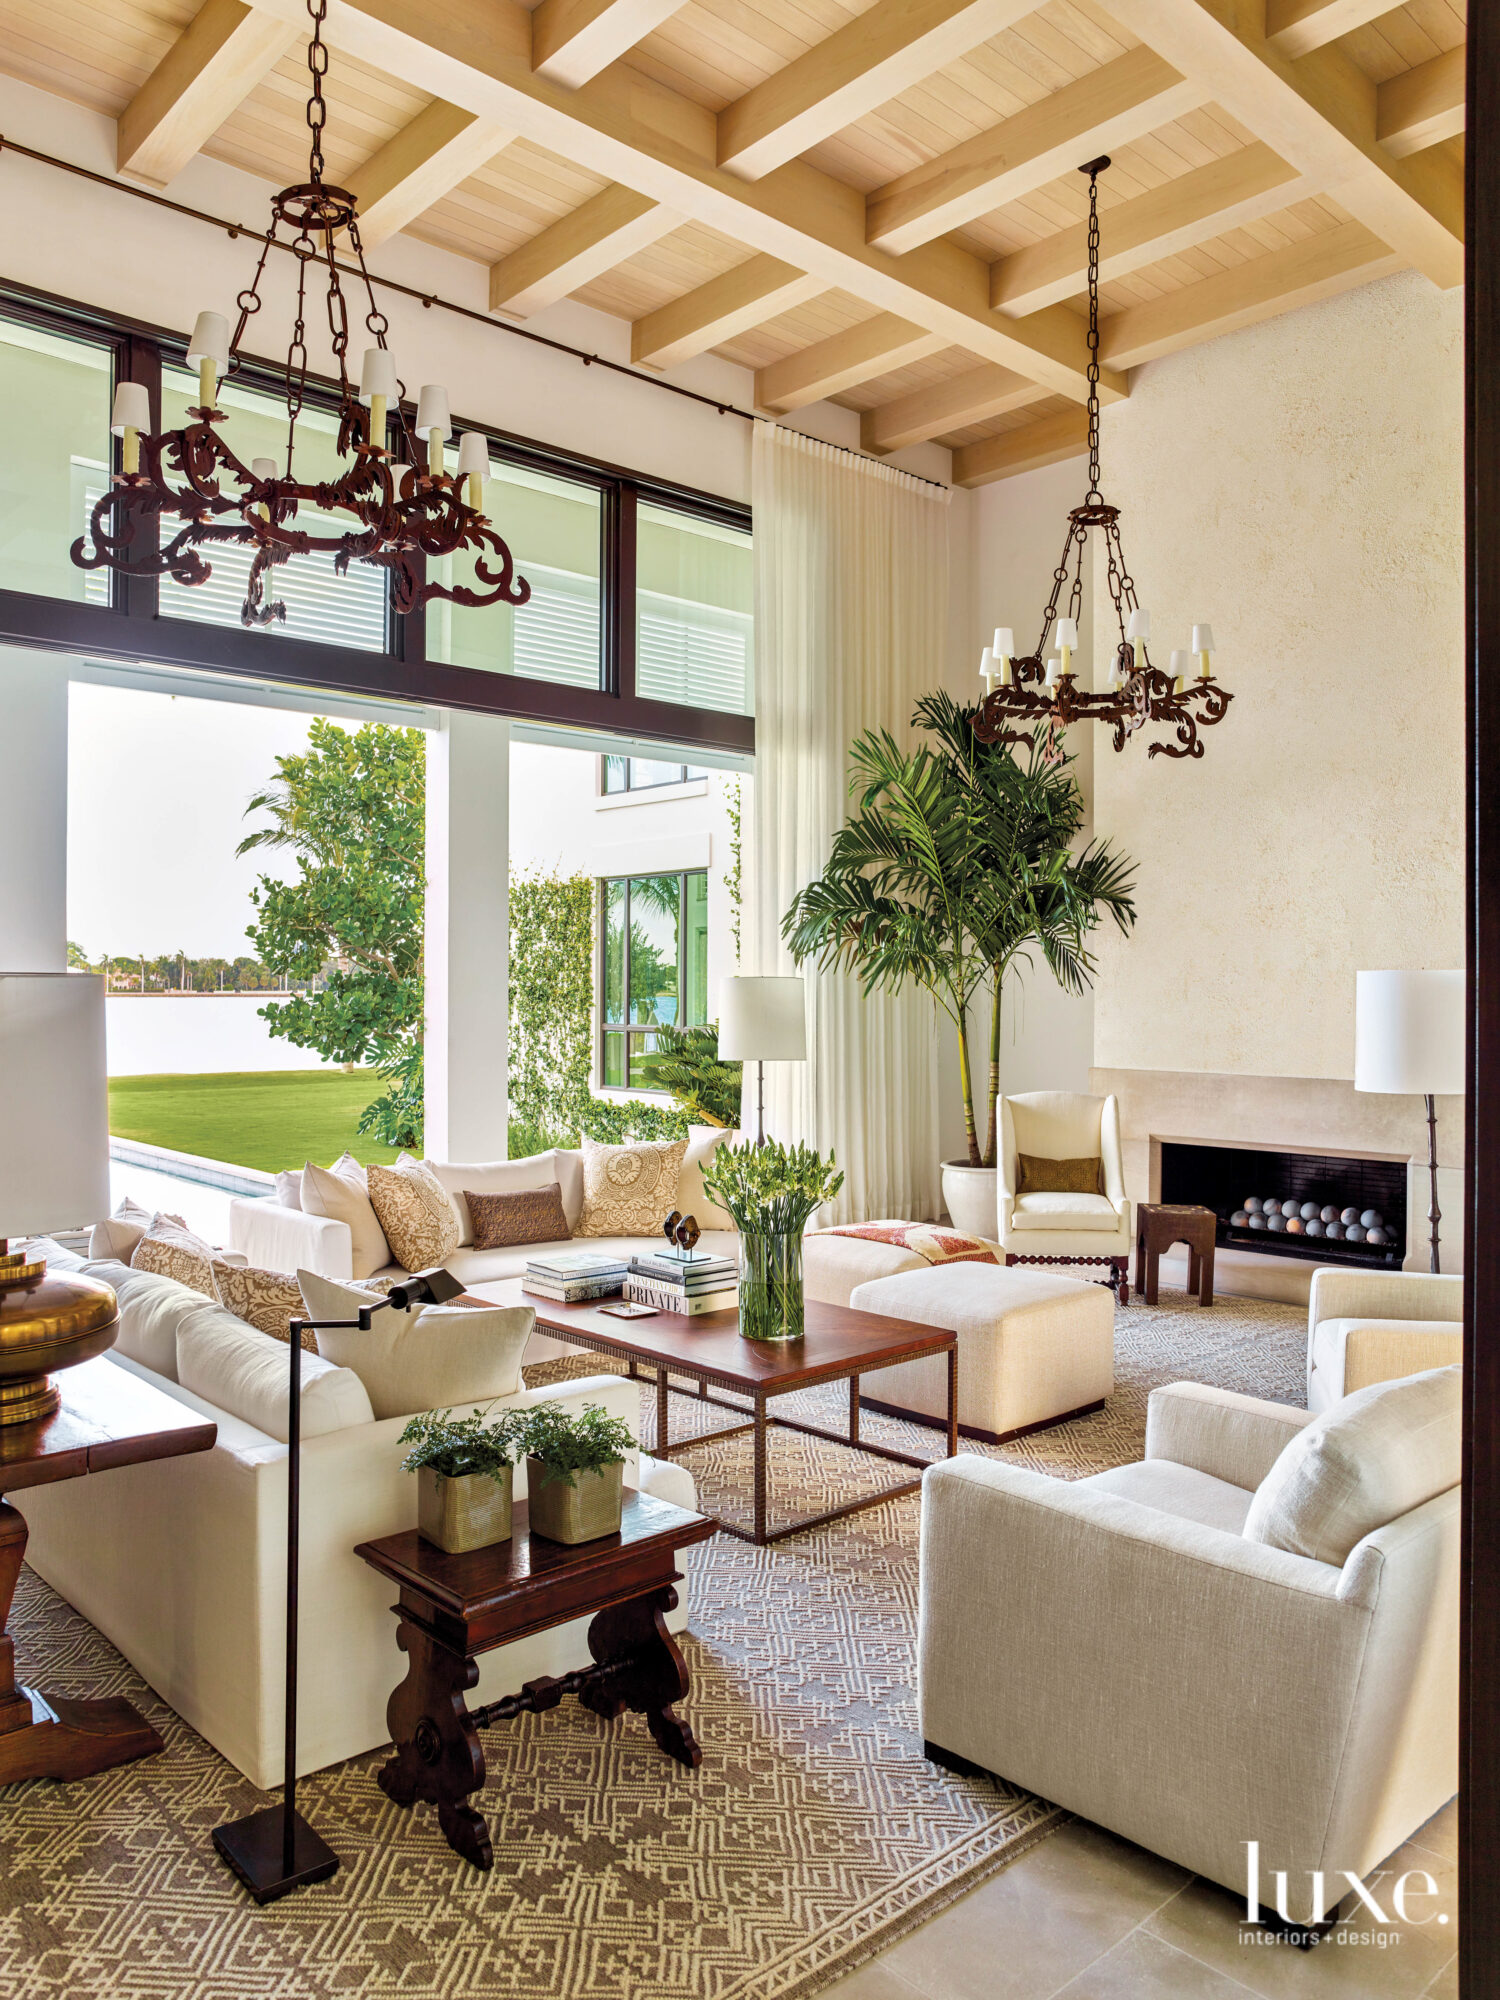 living area with white furnishings and antique chandeliers